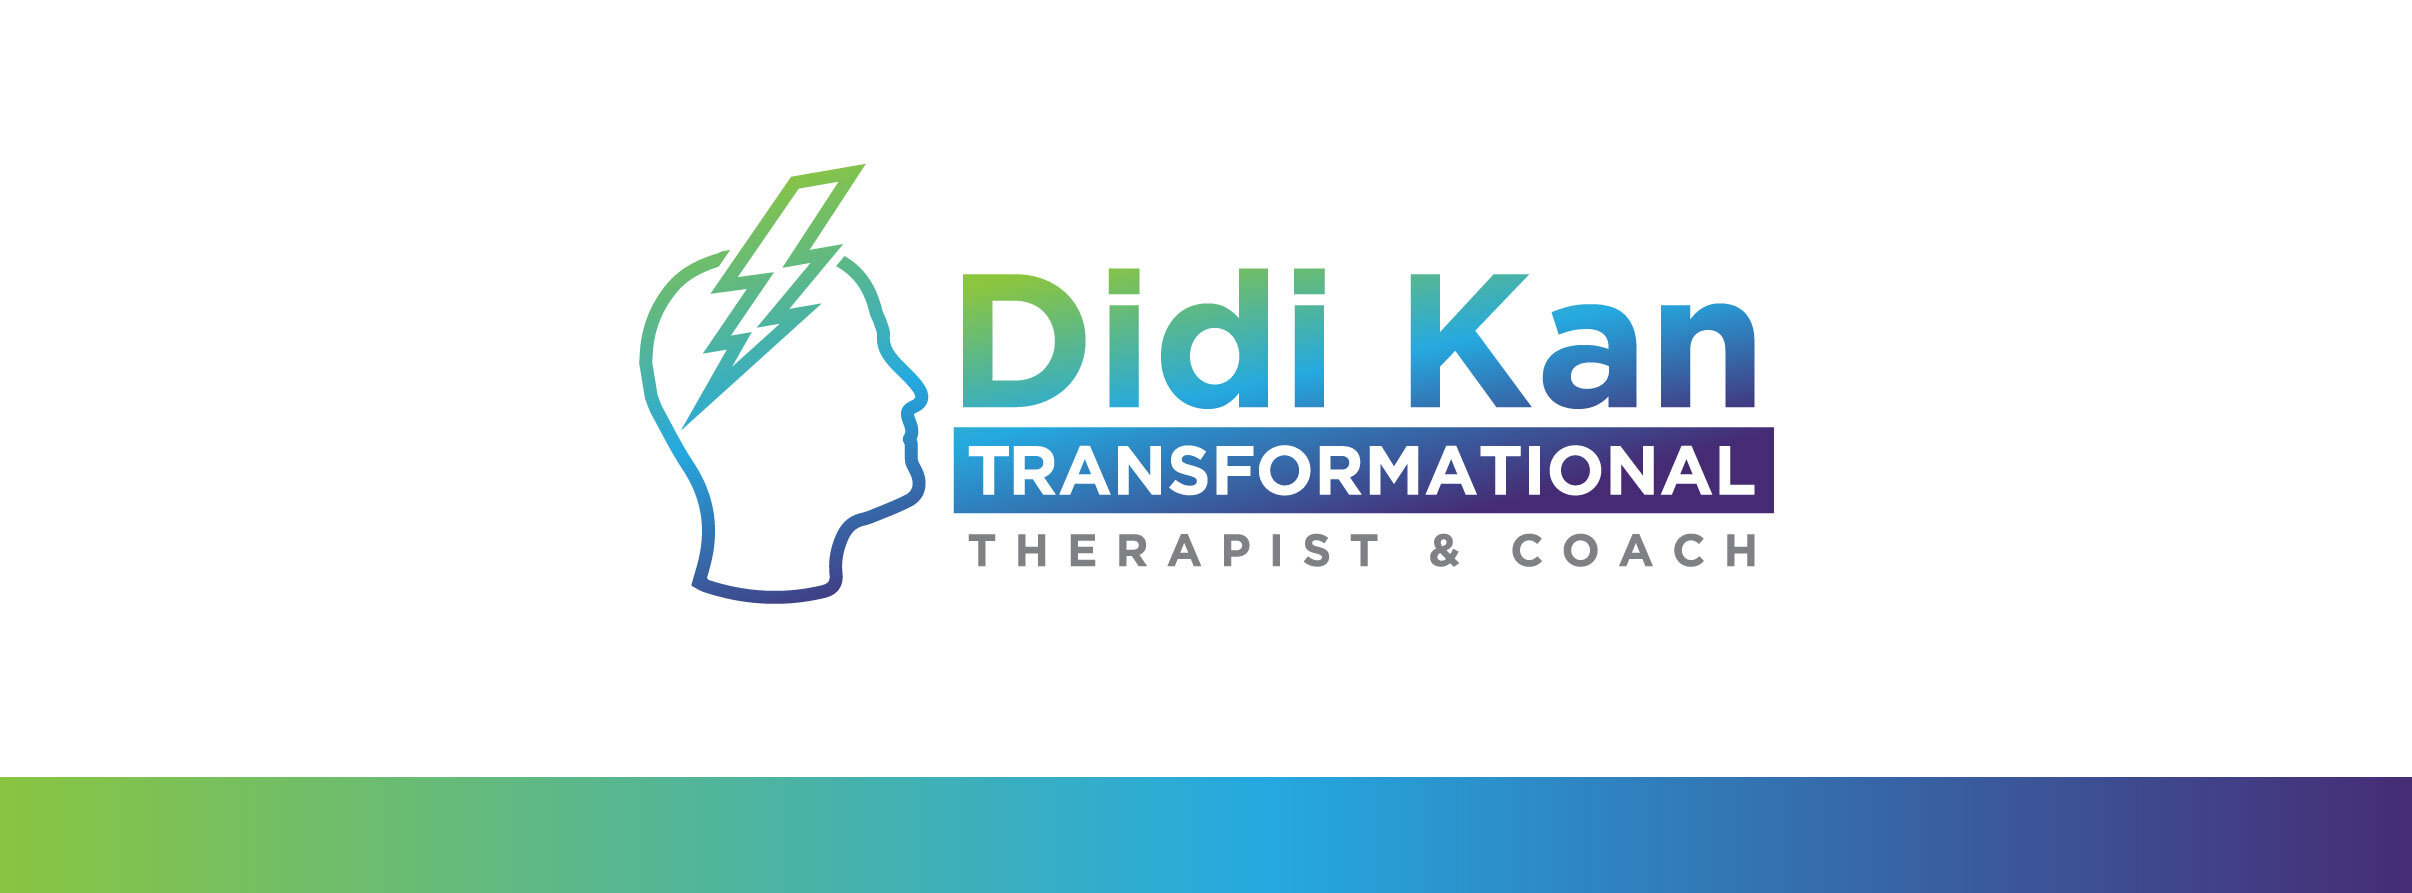 Didi Kan RTT Rapid Transformational Therapy Therapist and Coach